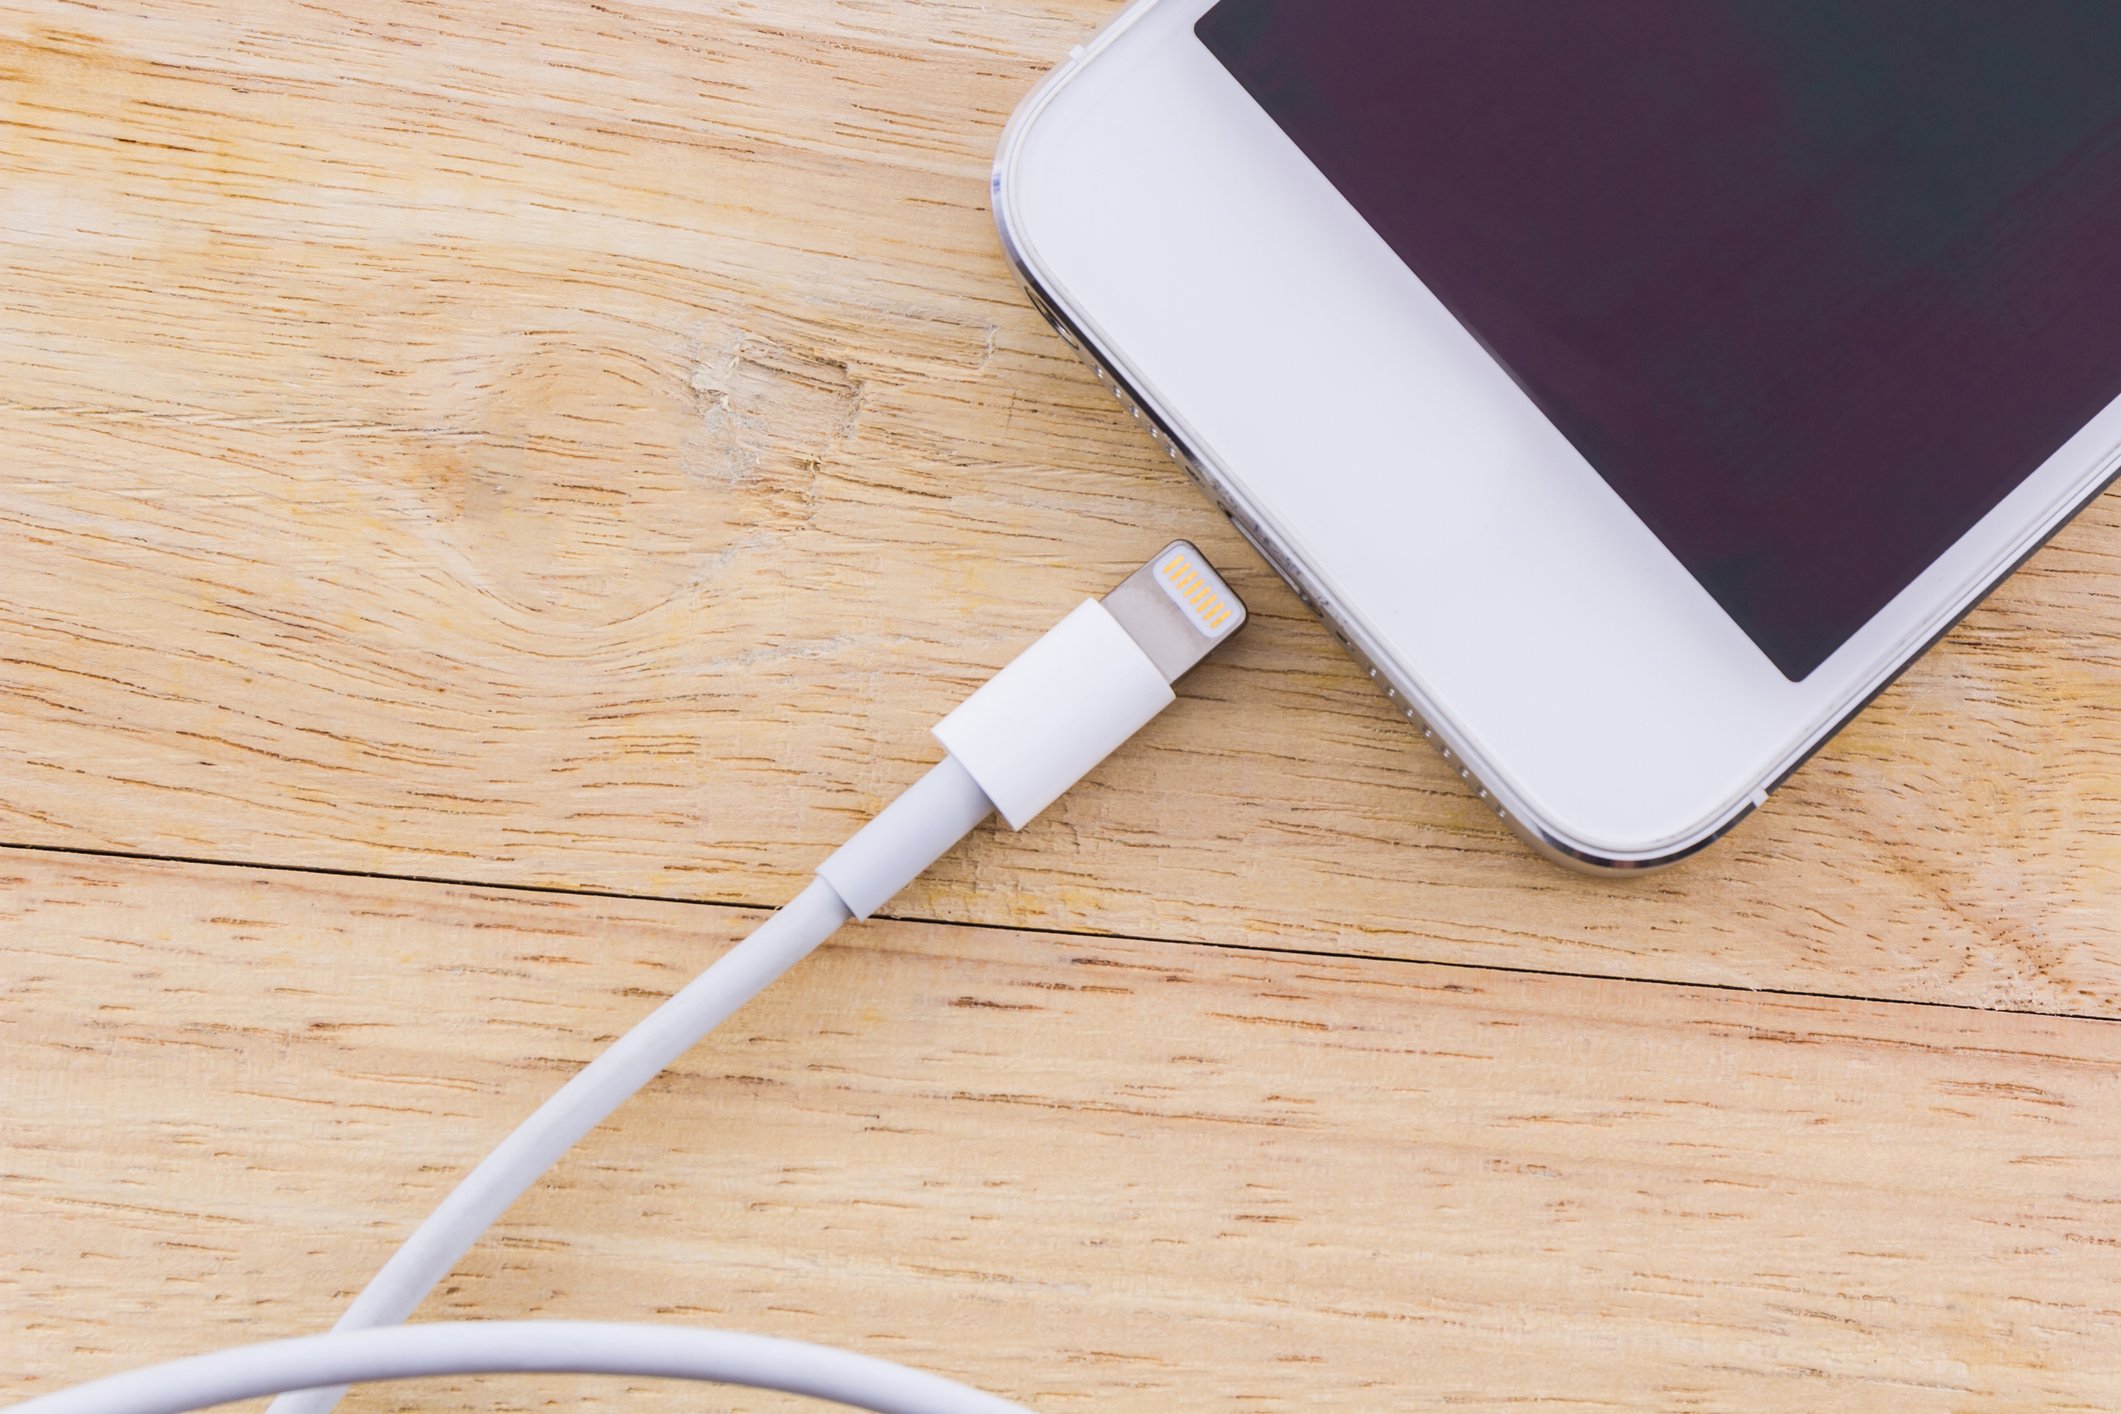 Mobile Phone Chargers Escalate Risk of Burn, Electrocution